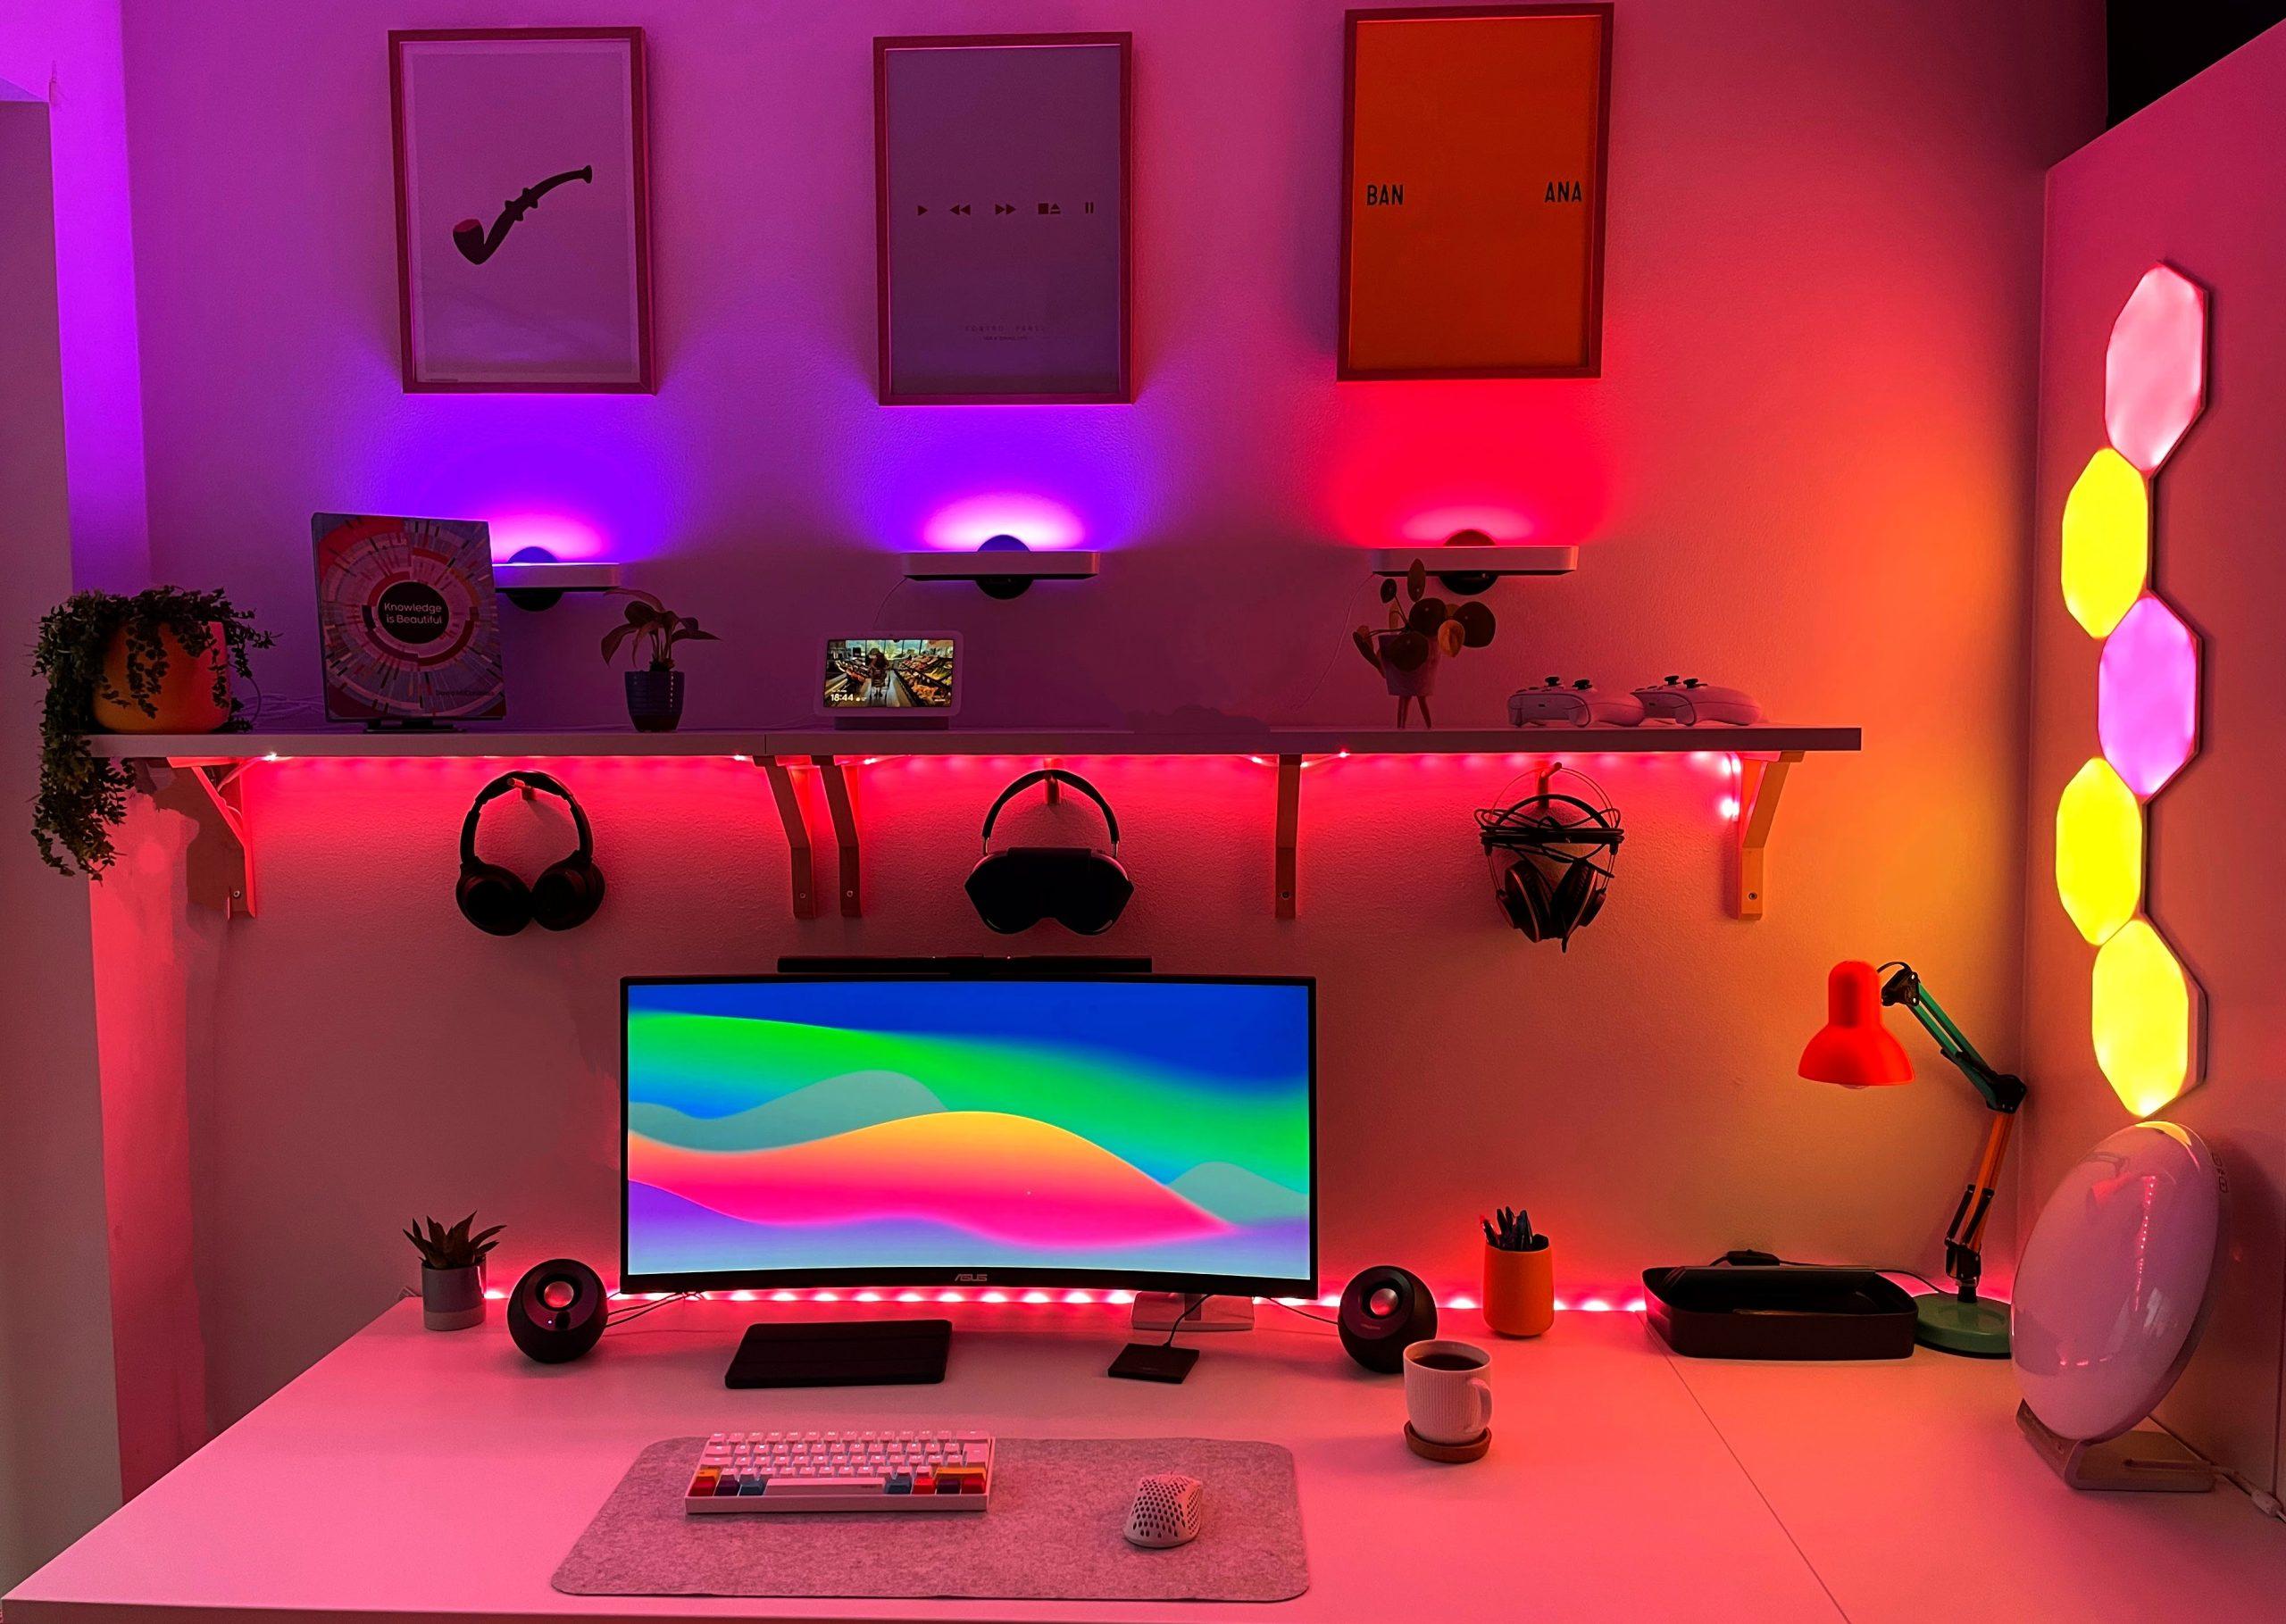 Hue The for Best is What Your vs Govee: Lighting vs Gaming Room? Nanoleaf